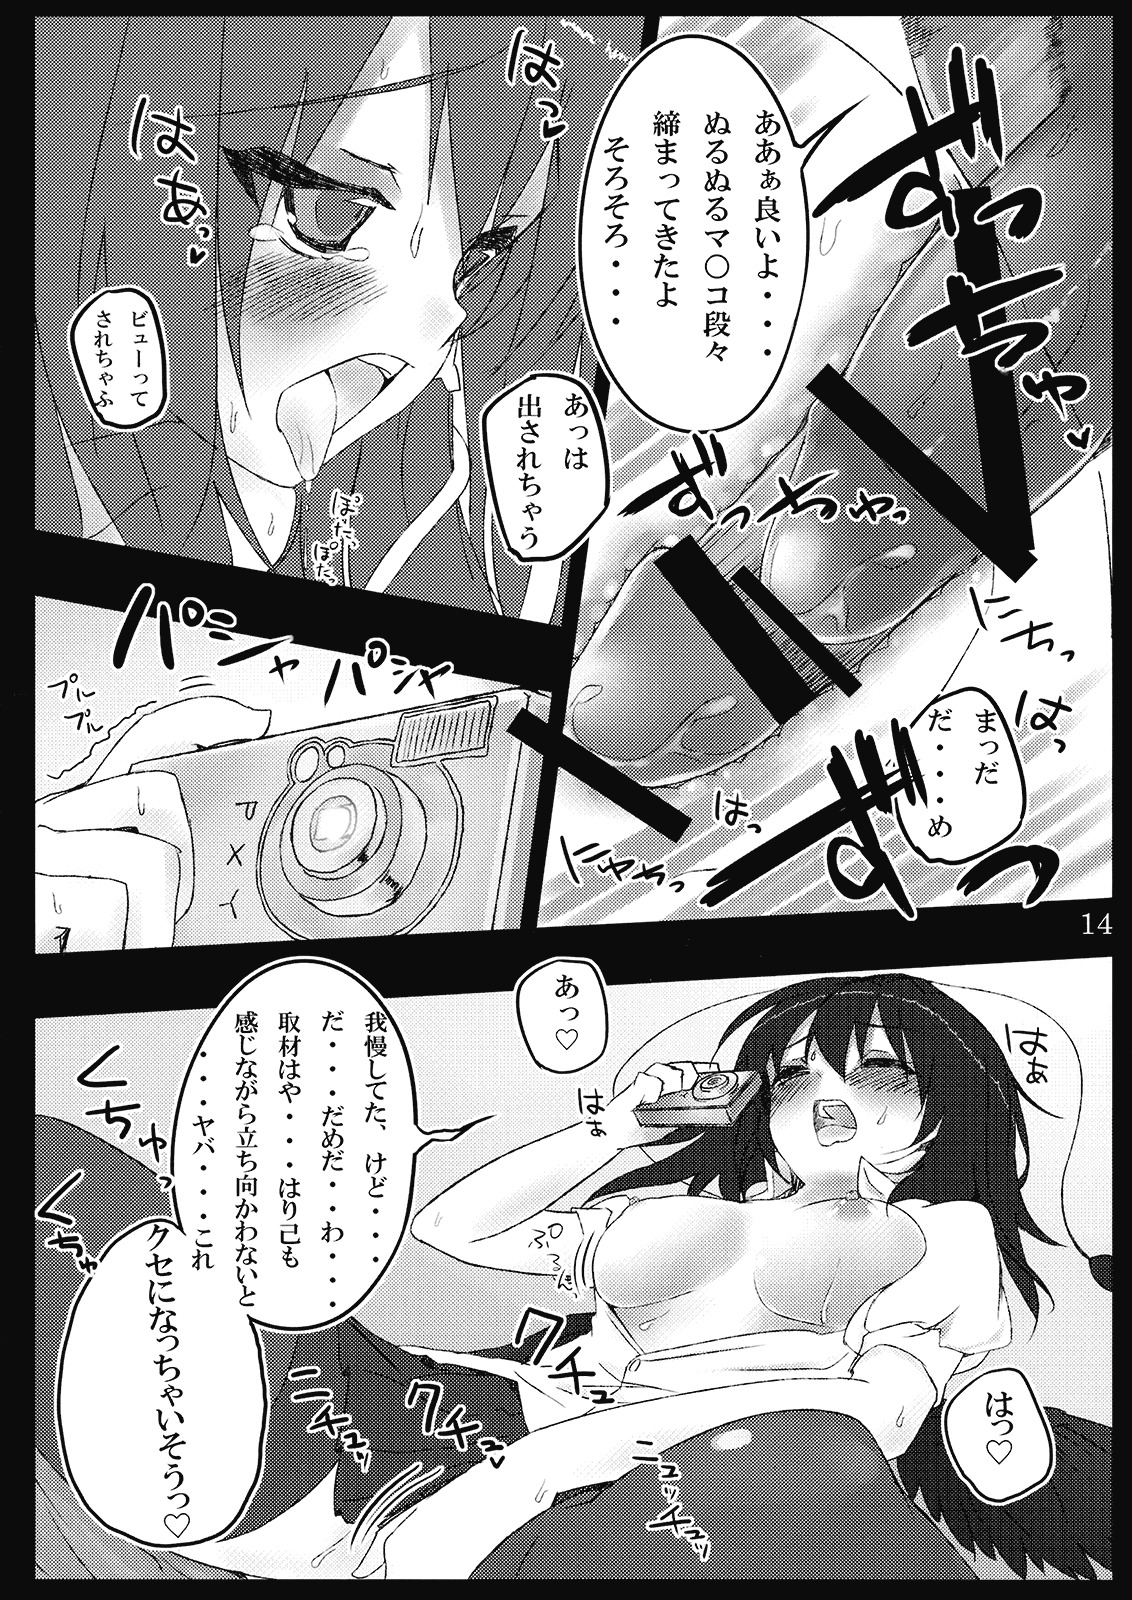 (C77) [39xream (Suzume Miku)] Nueccho! (Touhou Project) page 14 full